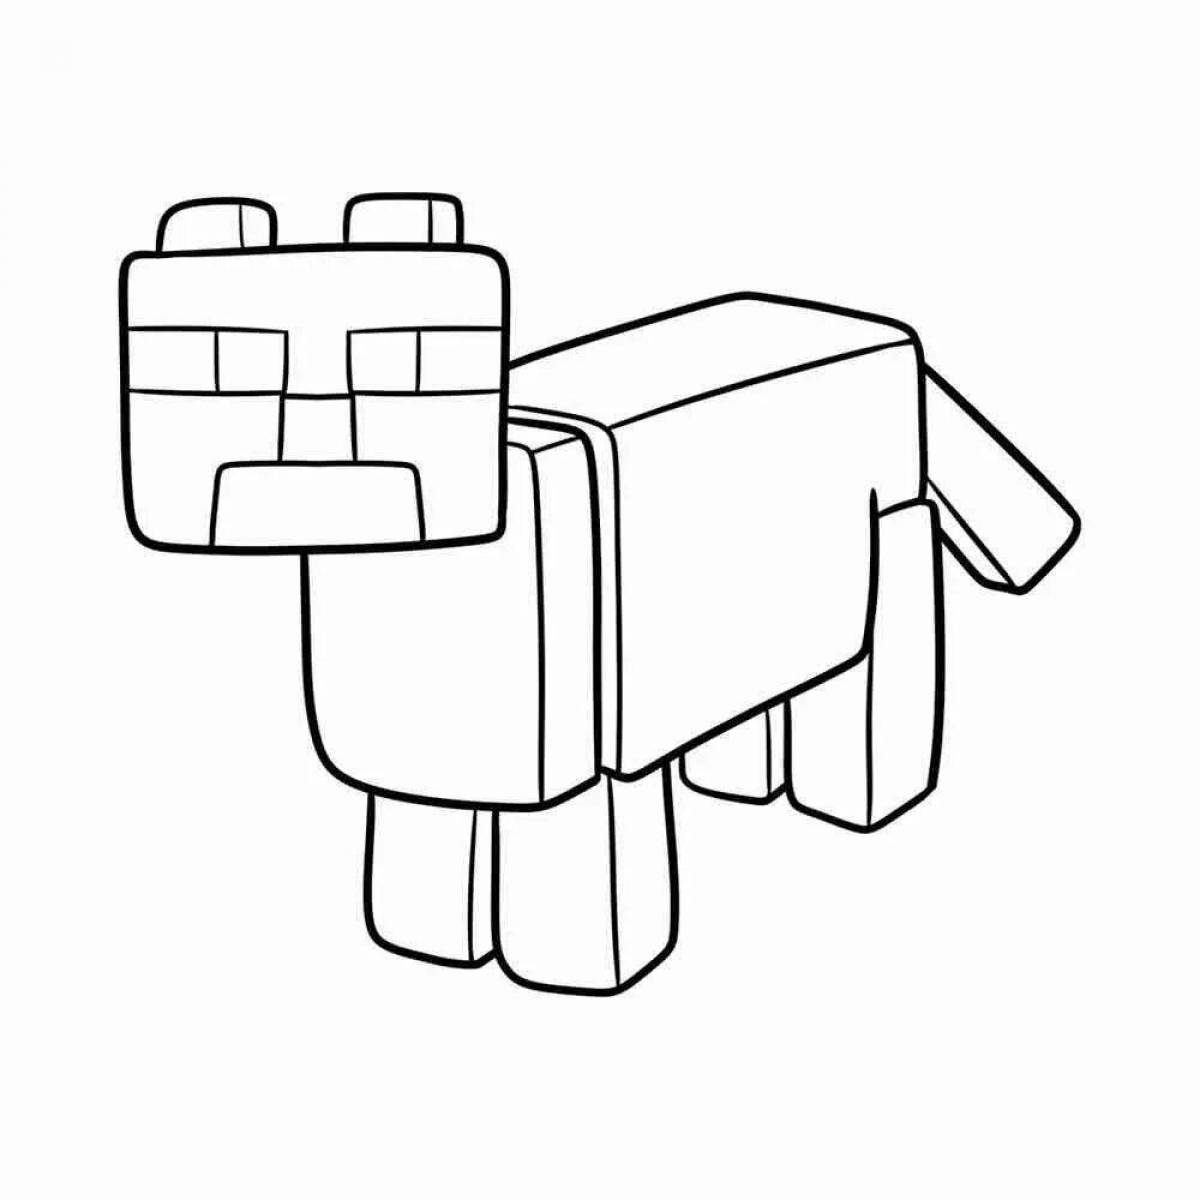 Colorful minecraft animal coloring page